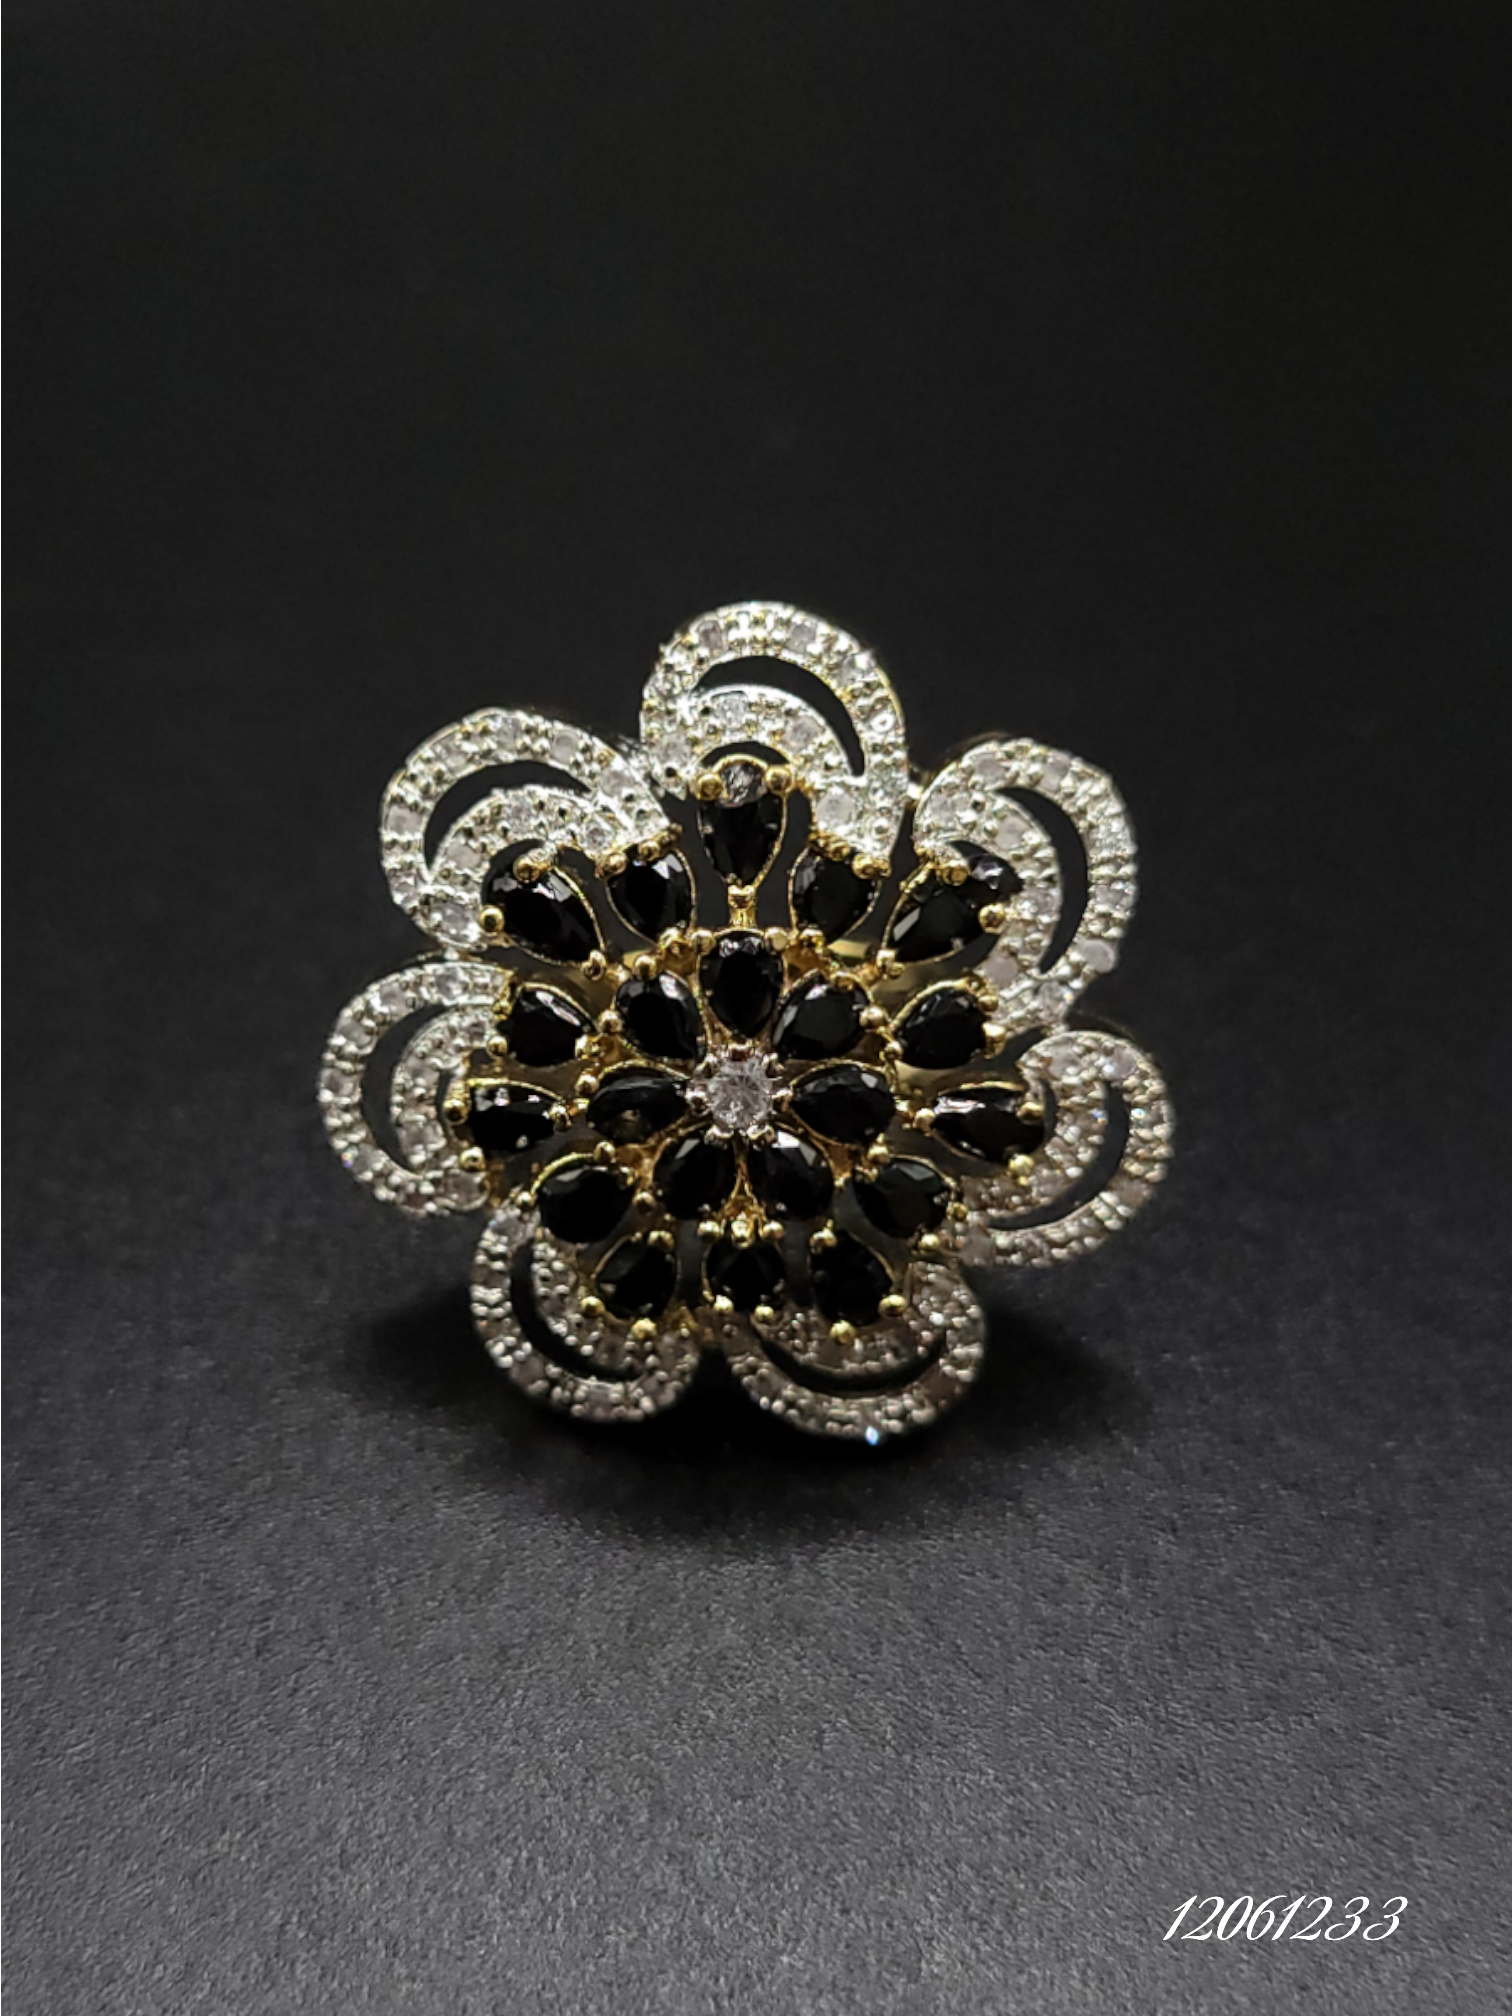 FLORAL DIAMOND IN GOLD TONE WITH BLACK STONES